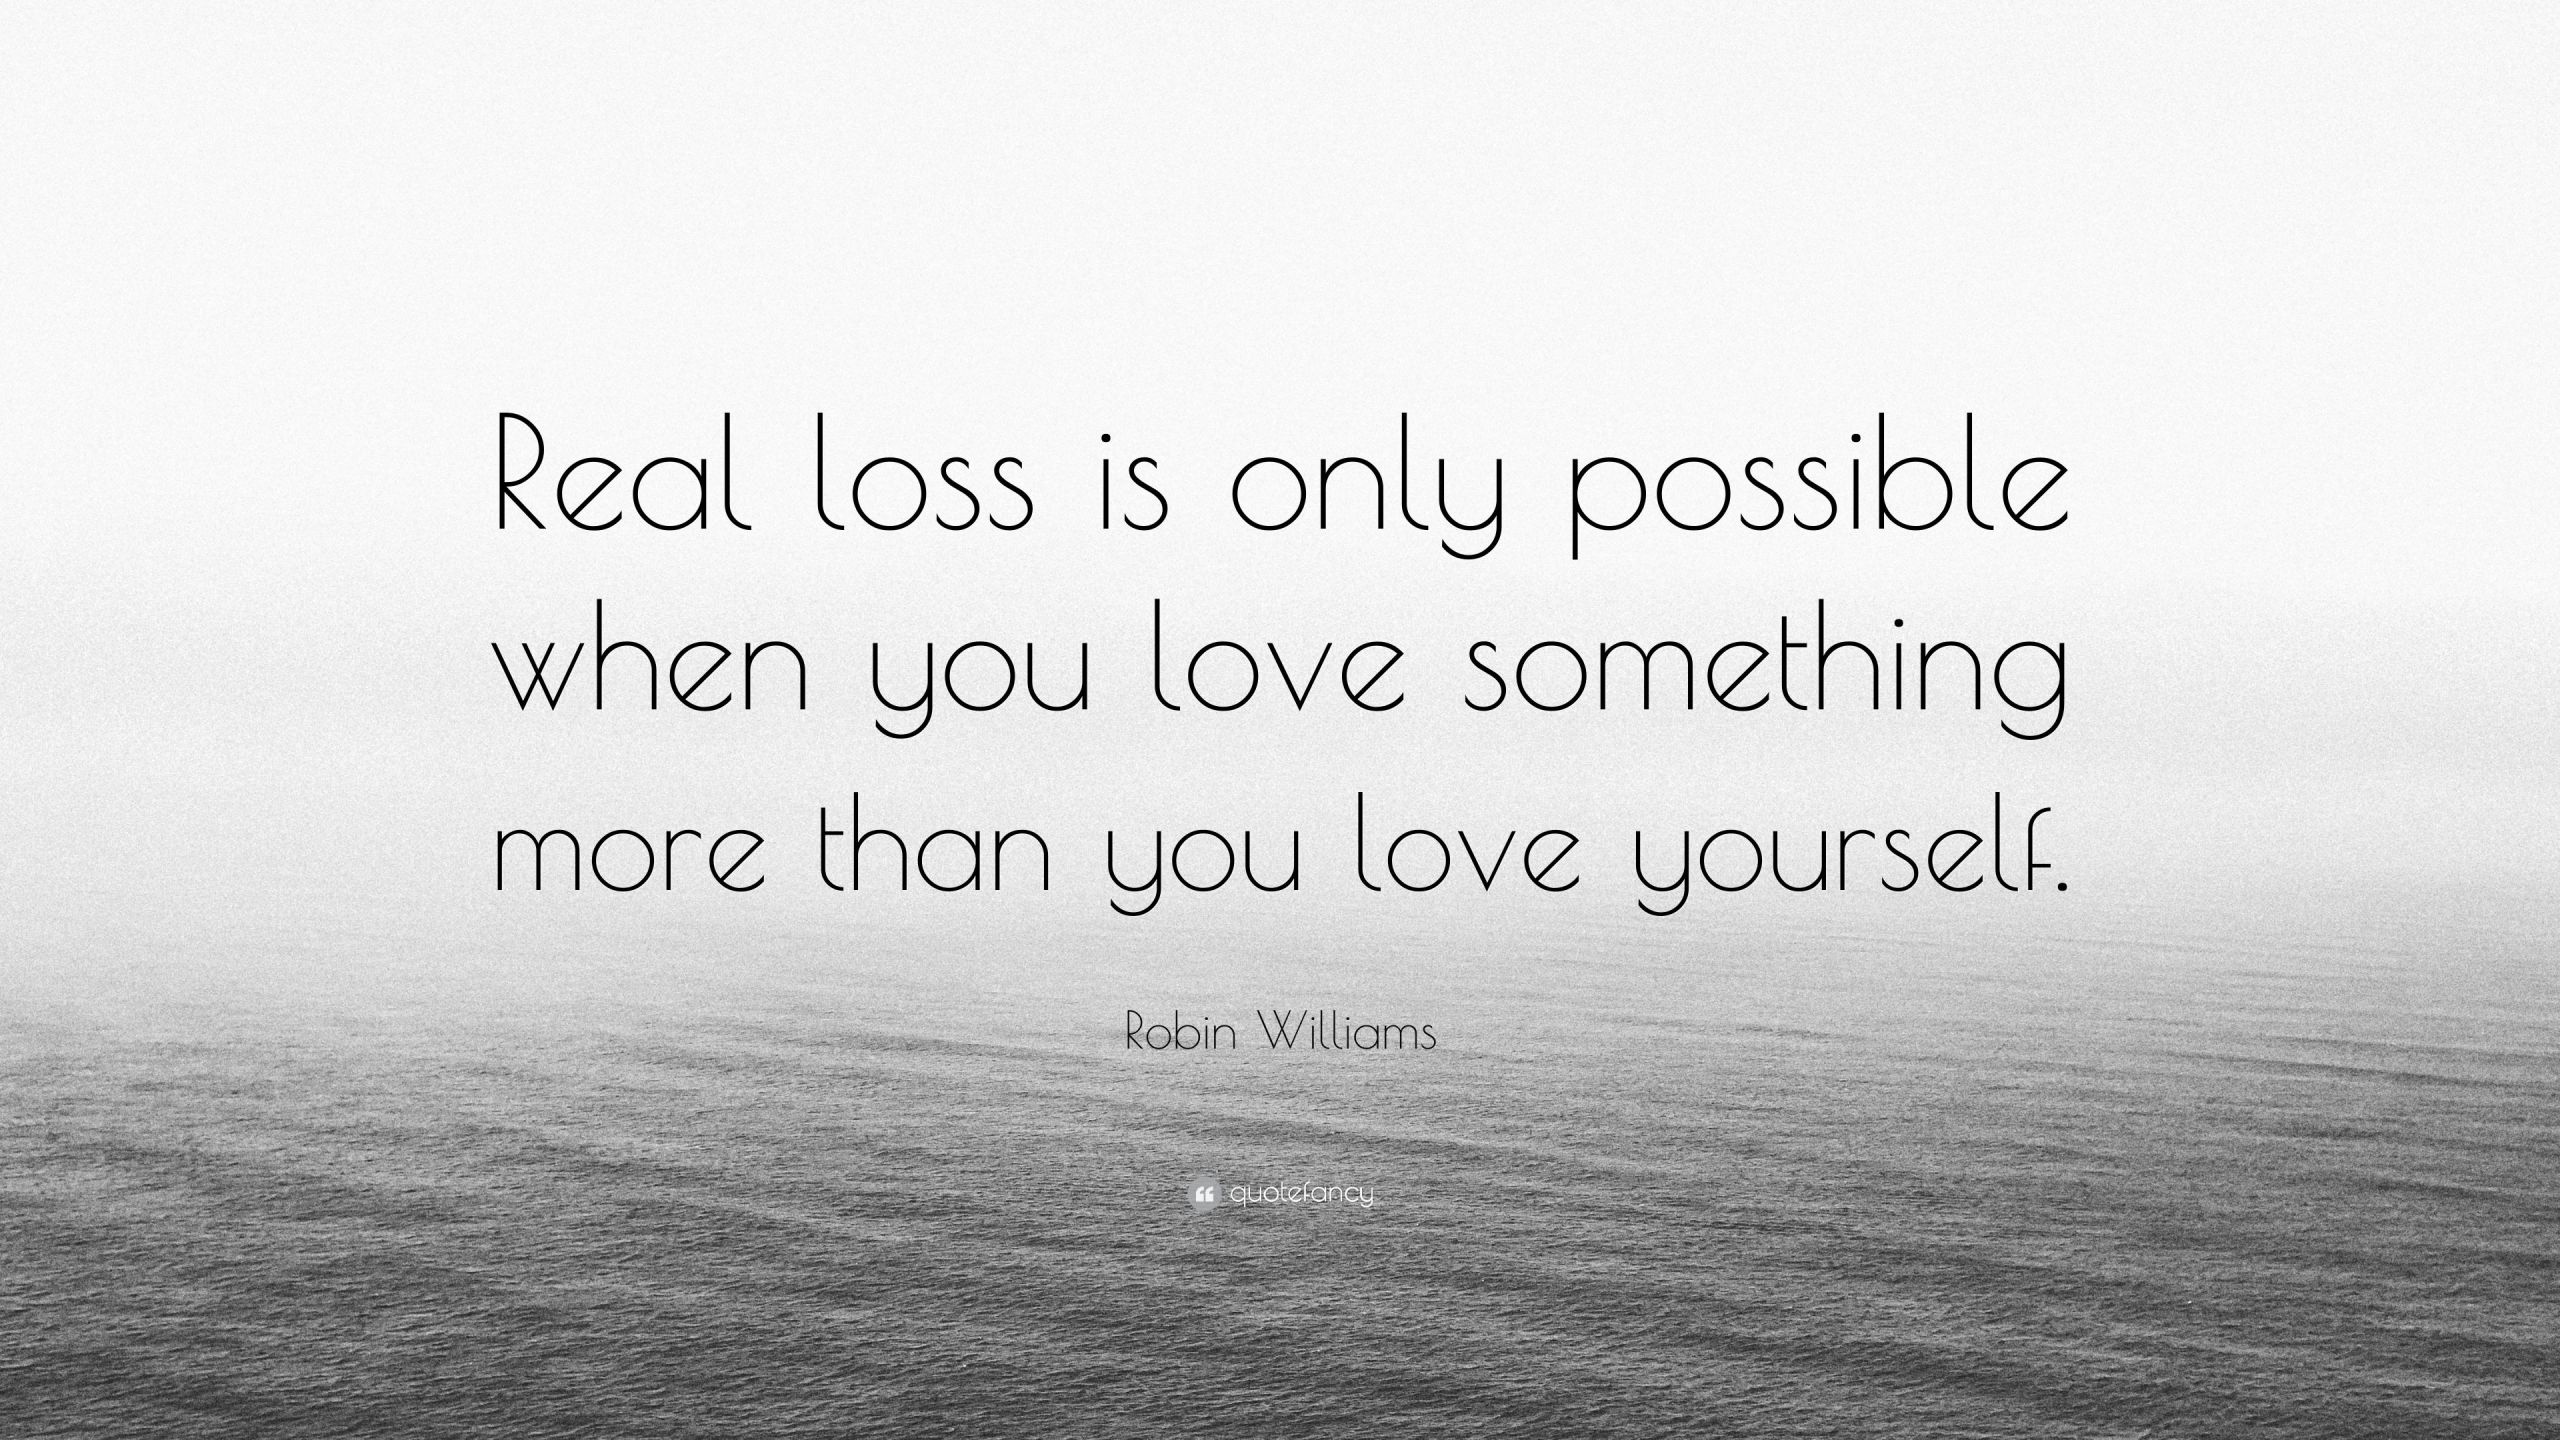 Quotes About Love And Loss
 Robin Williams Quote “Real loss is only possible when you